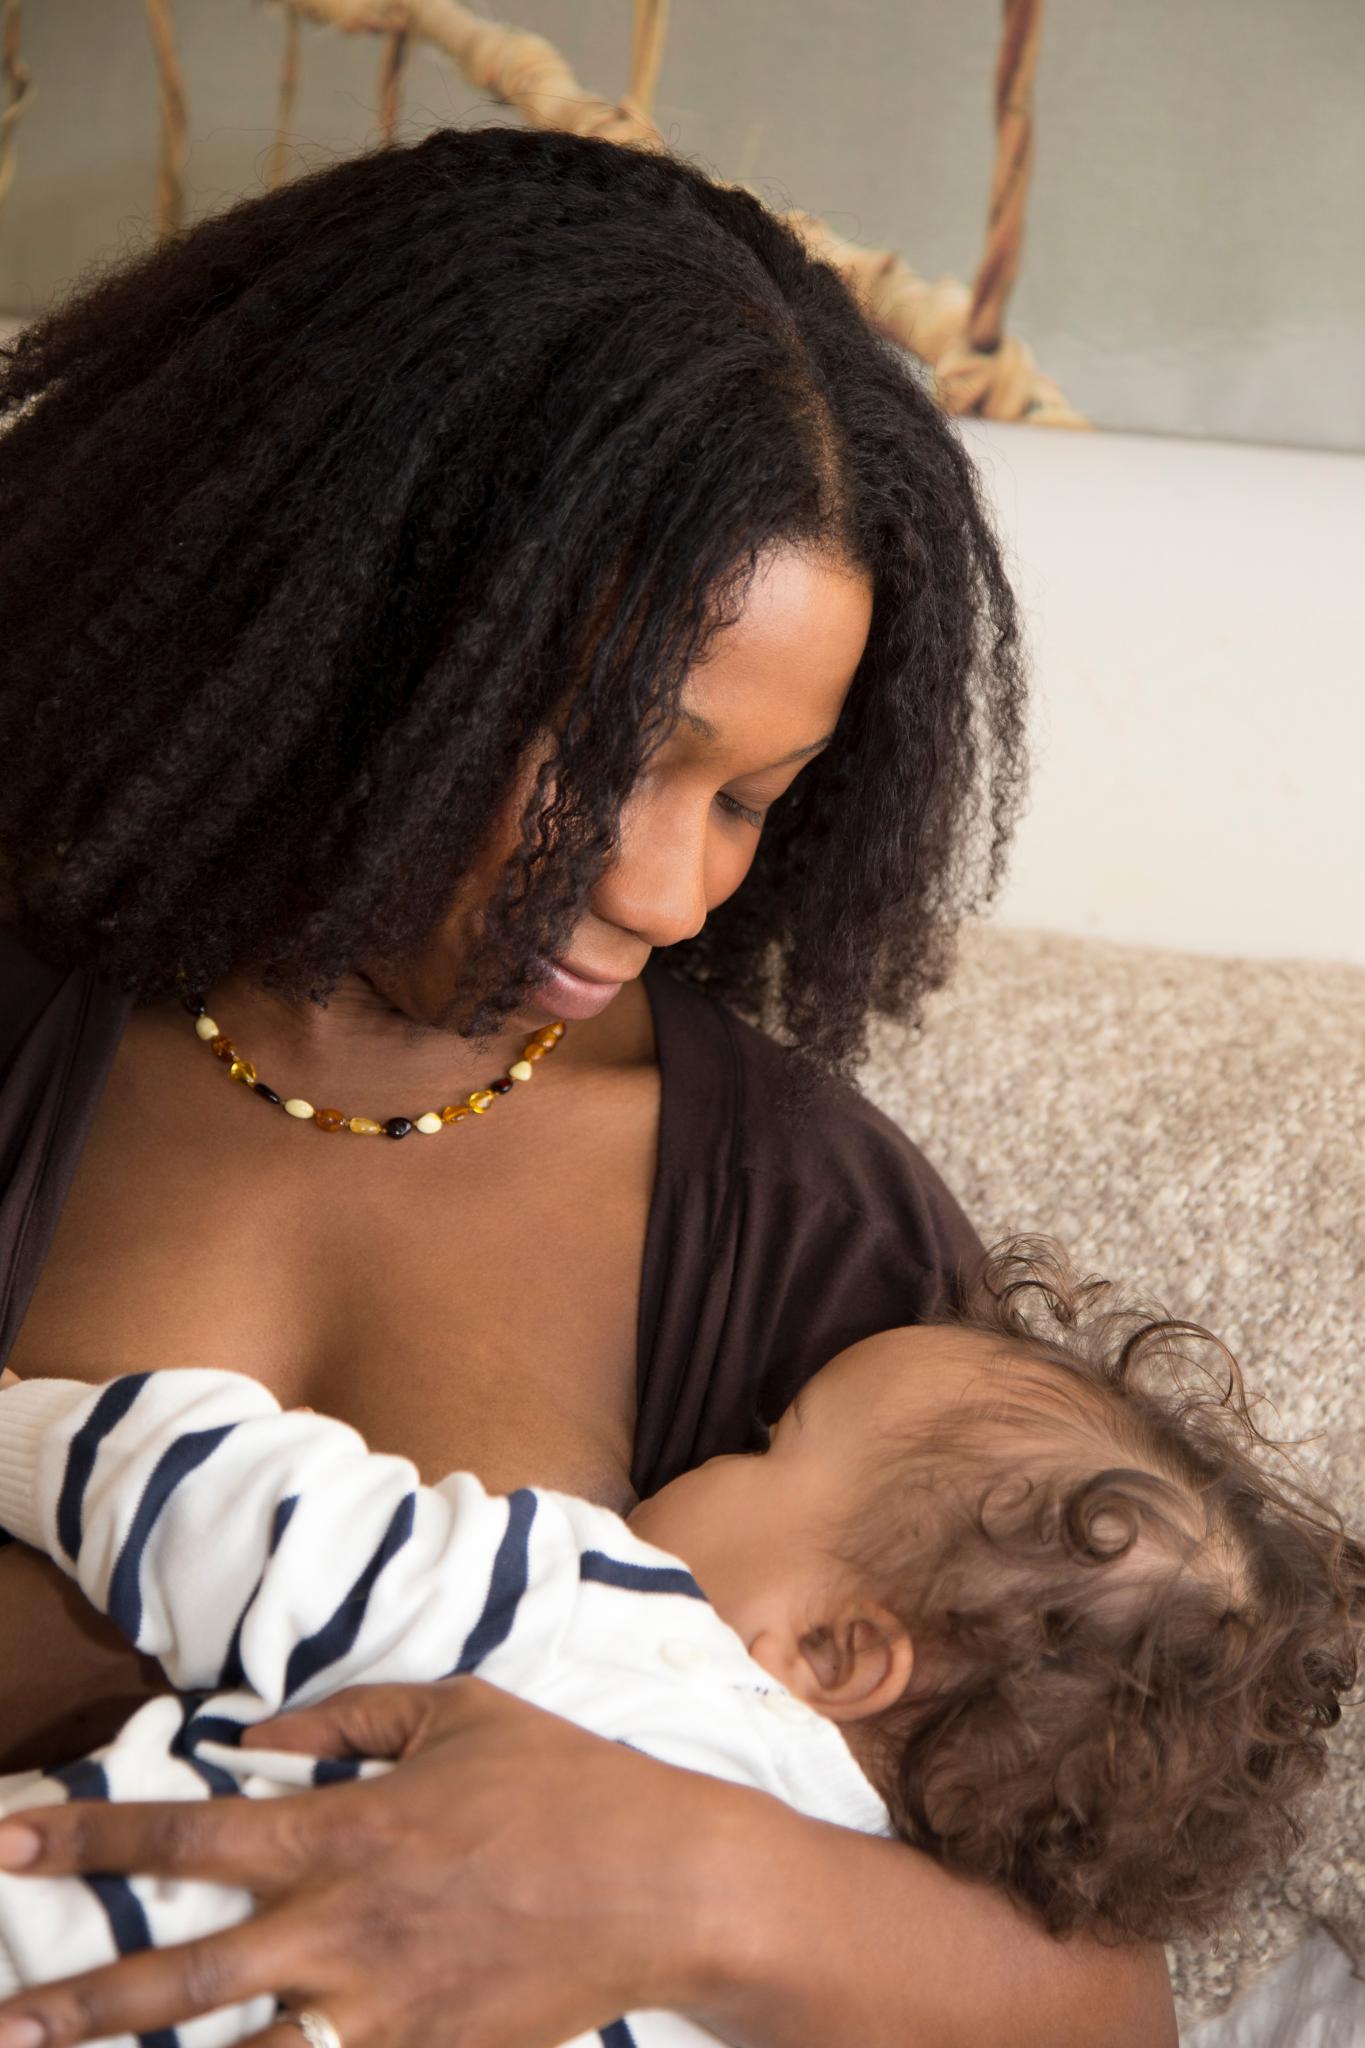 Would You Allow a Friend to Breastfeed Your Child?